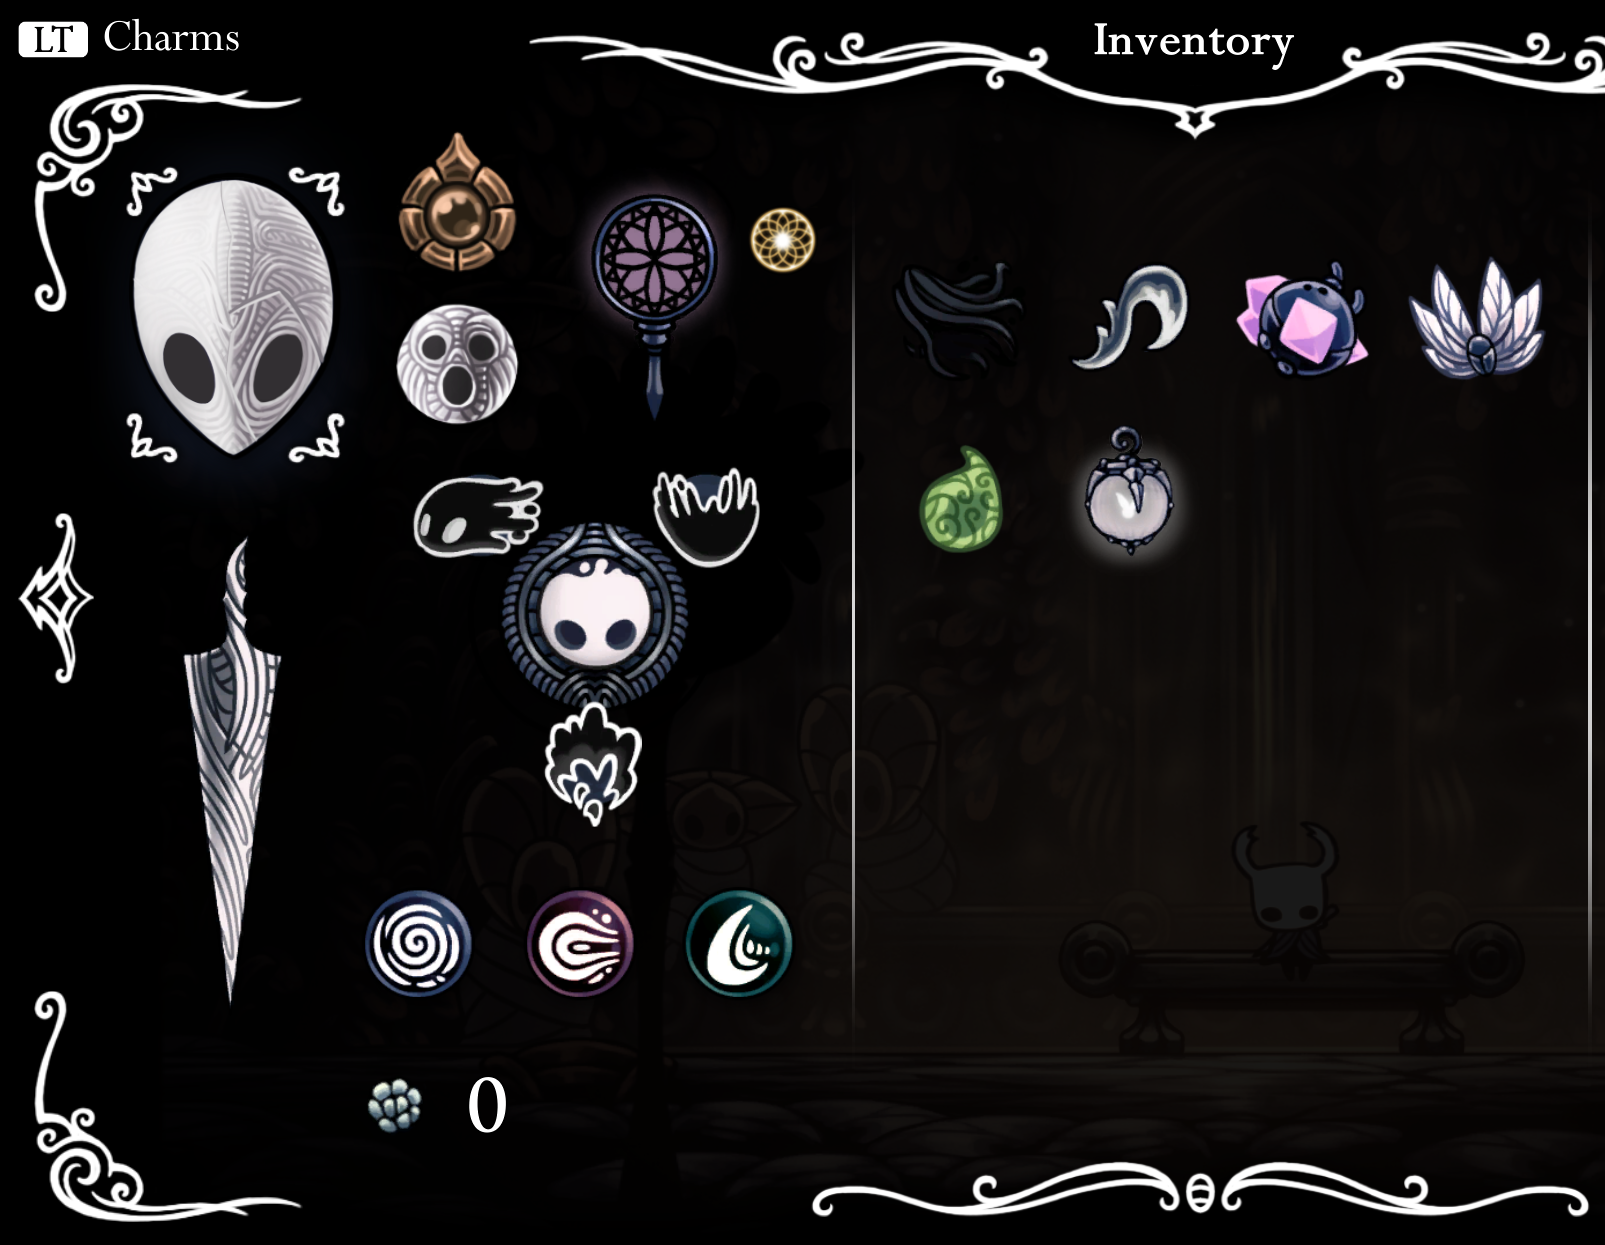 hollow knight complete journal